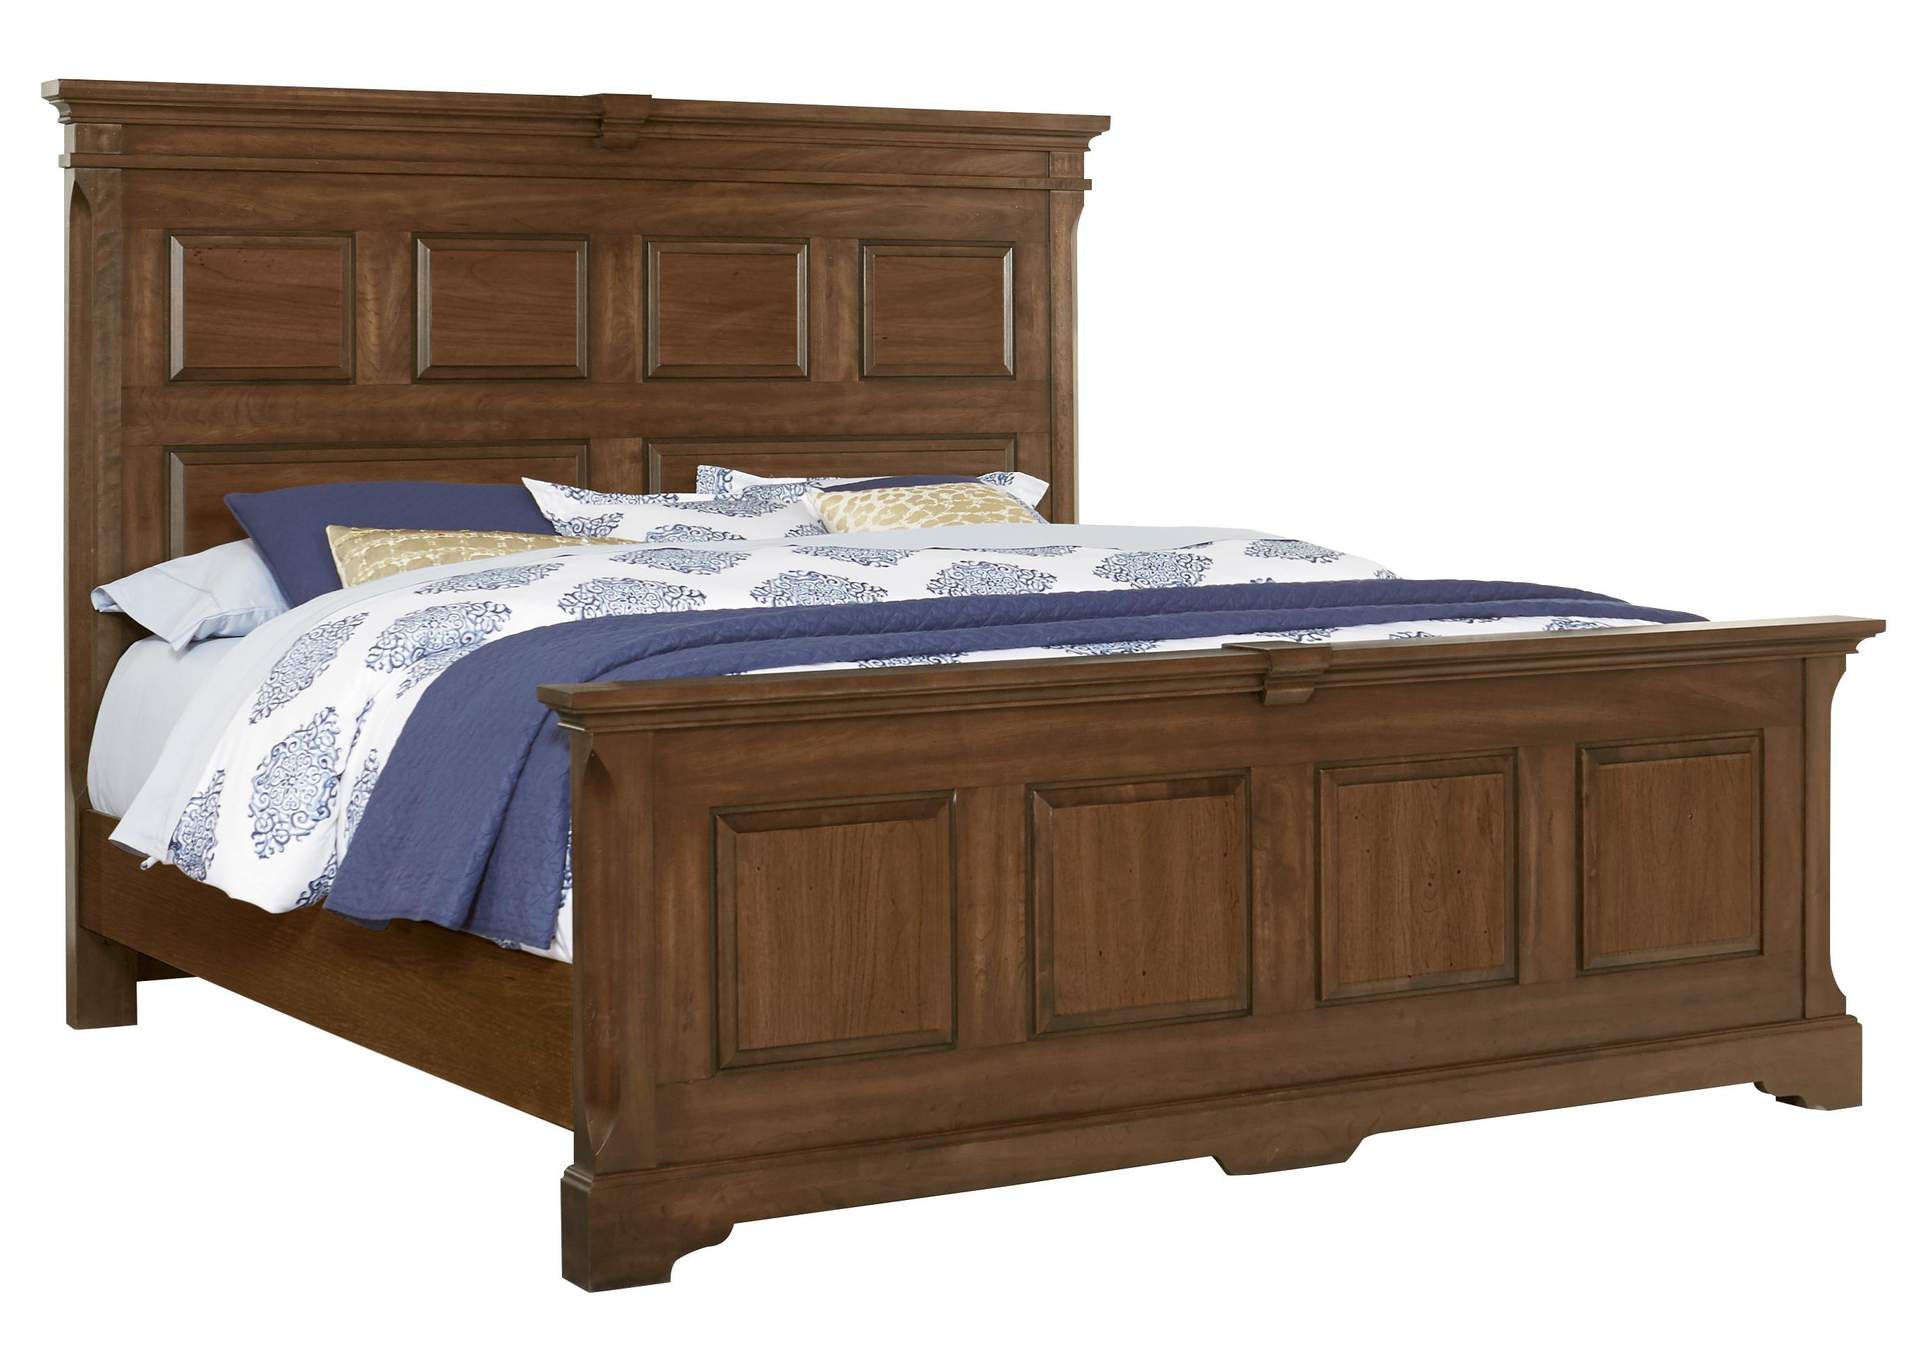 Heritage-Amish Cherry Queen Mansion Bed,Vaughan-Bassett